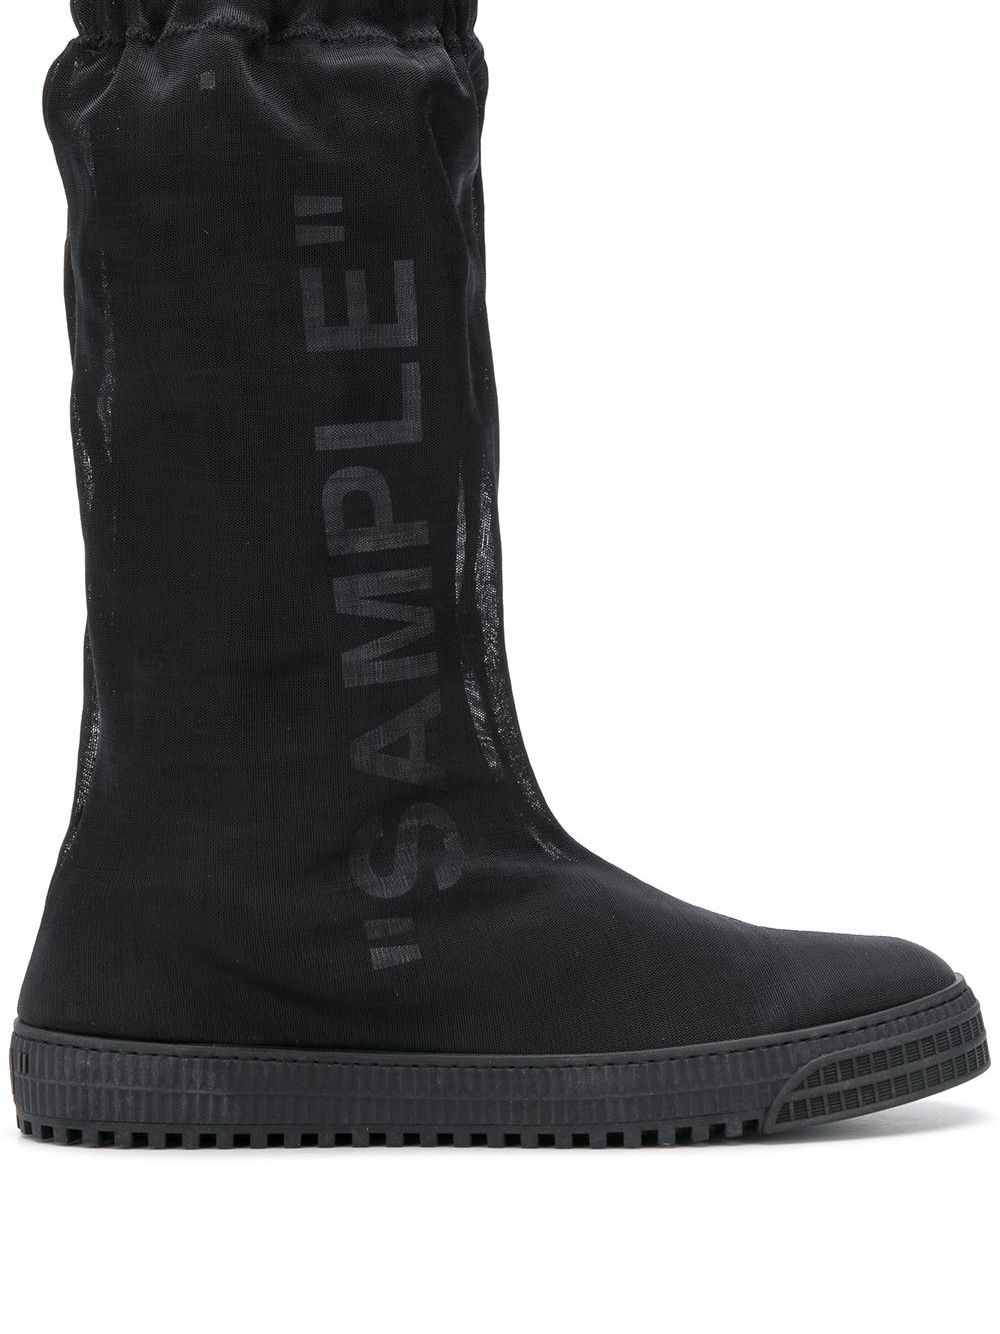 Off-White Sample boots